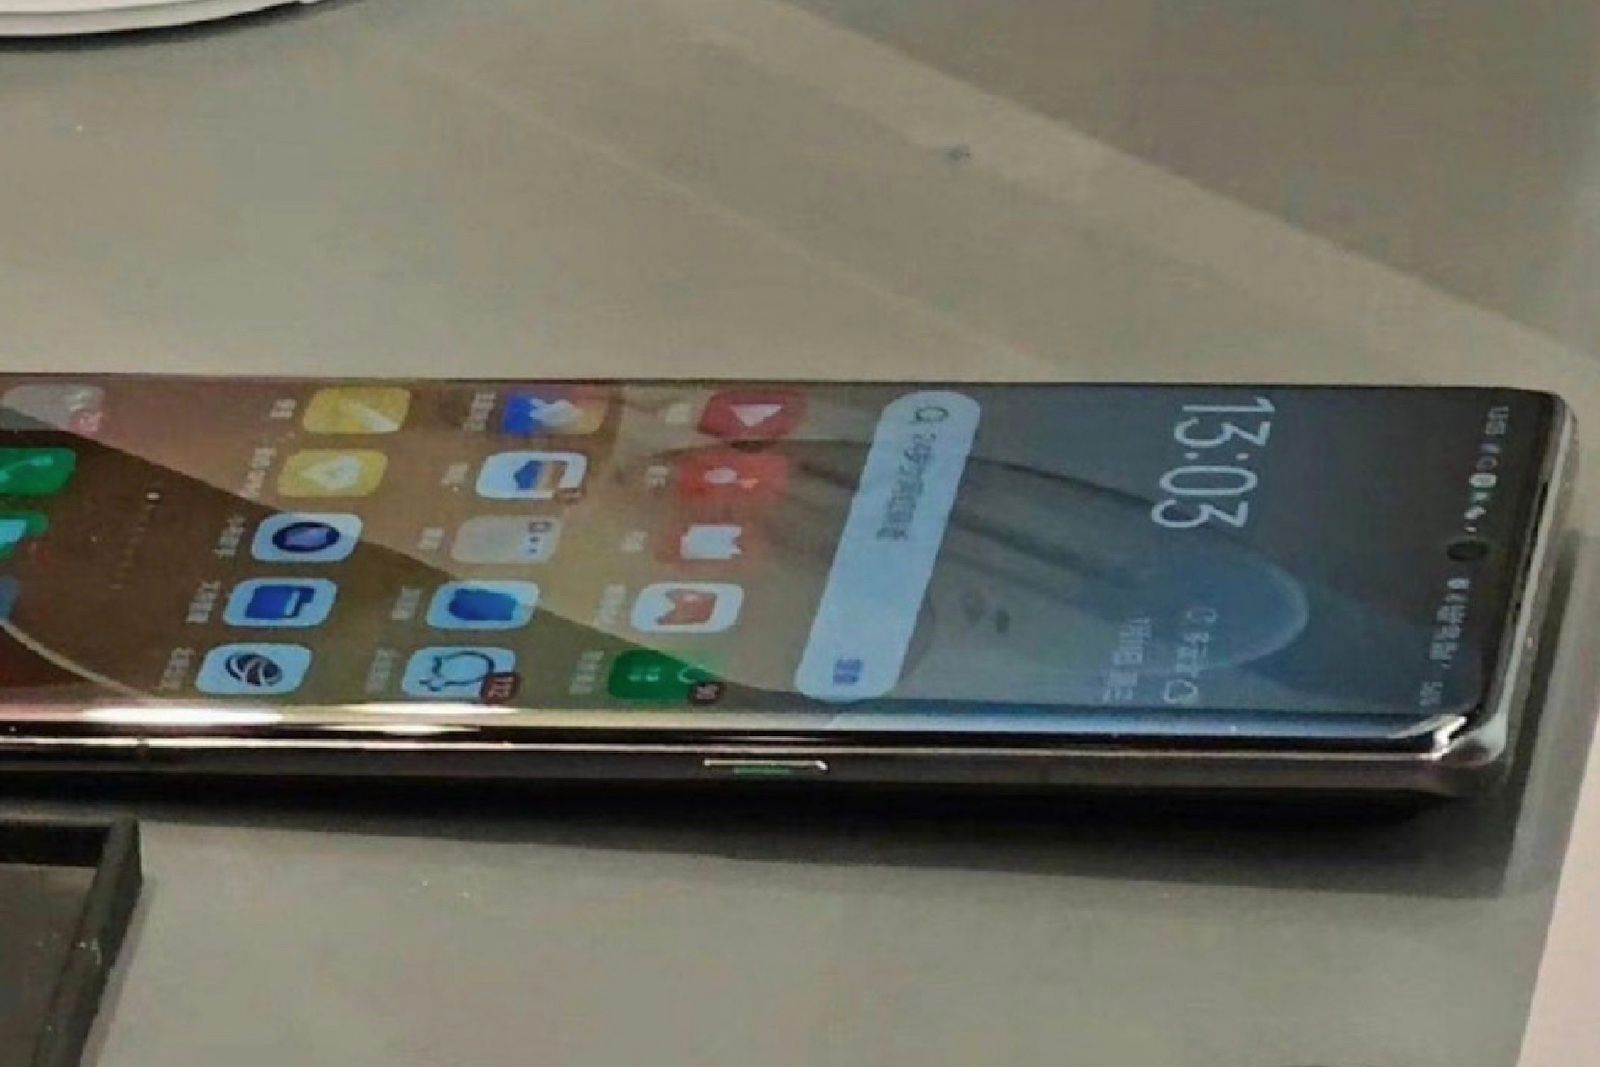 oppo find x6 front spyshot showing phone's display